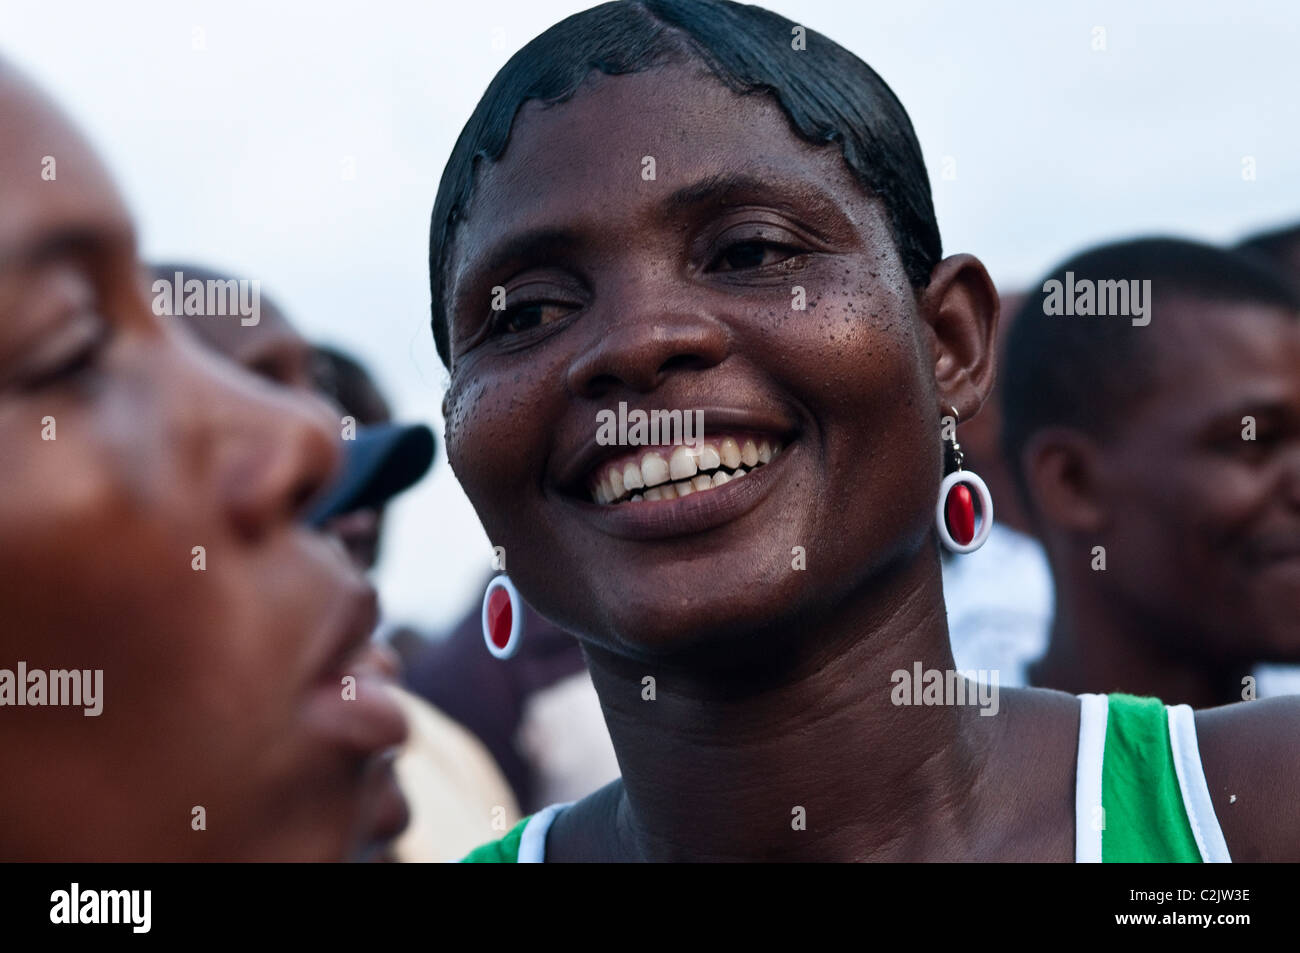 Happy African people, São Tomé and Príncipe, Africa Stock Photo - Alamy